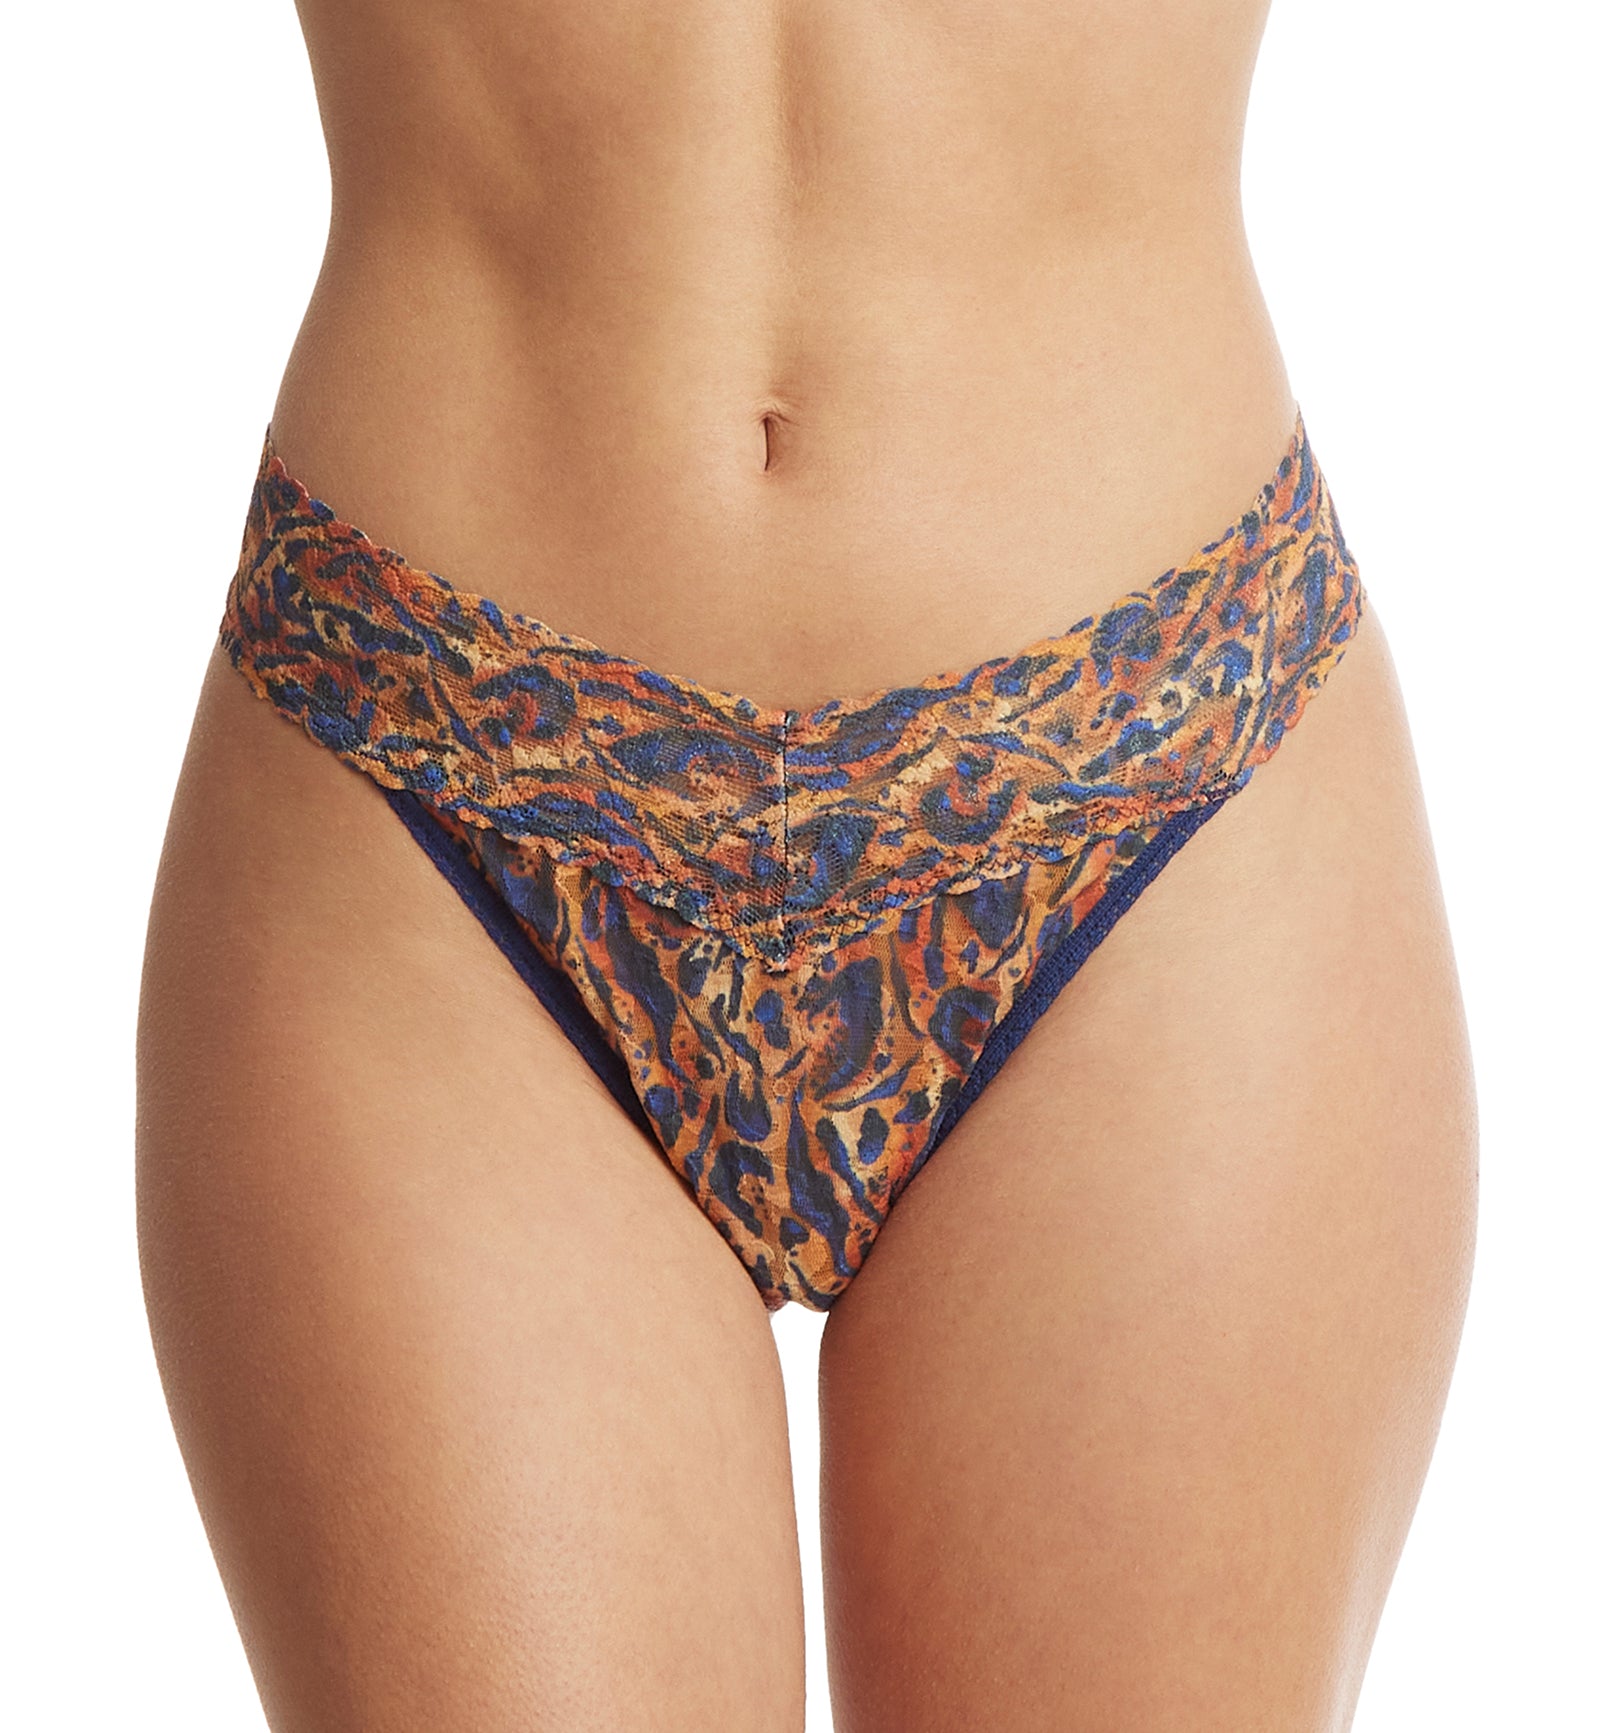 Hanky Panky Signature Lace Printed Original Rise Thong (PR4811P),Wild About Blue - Wild About Blue,One Size